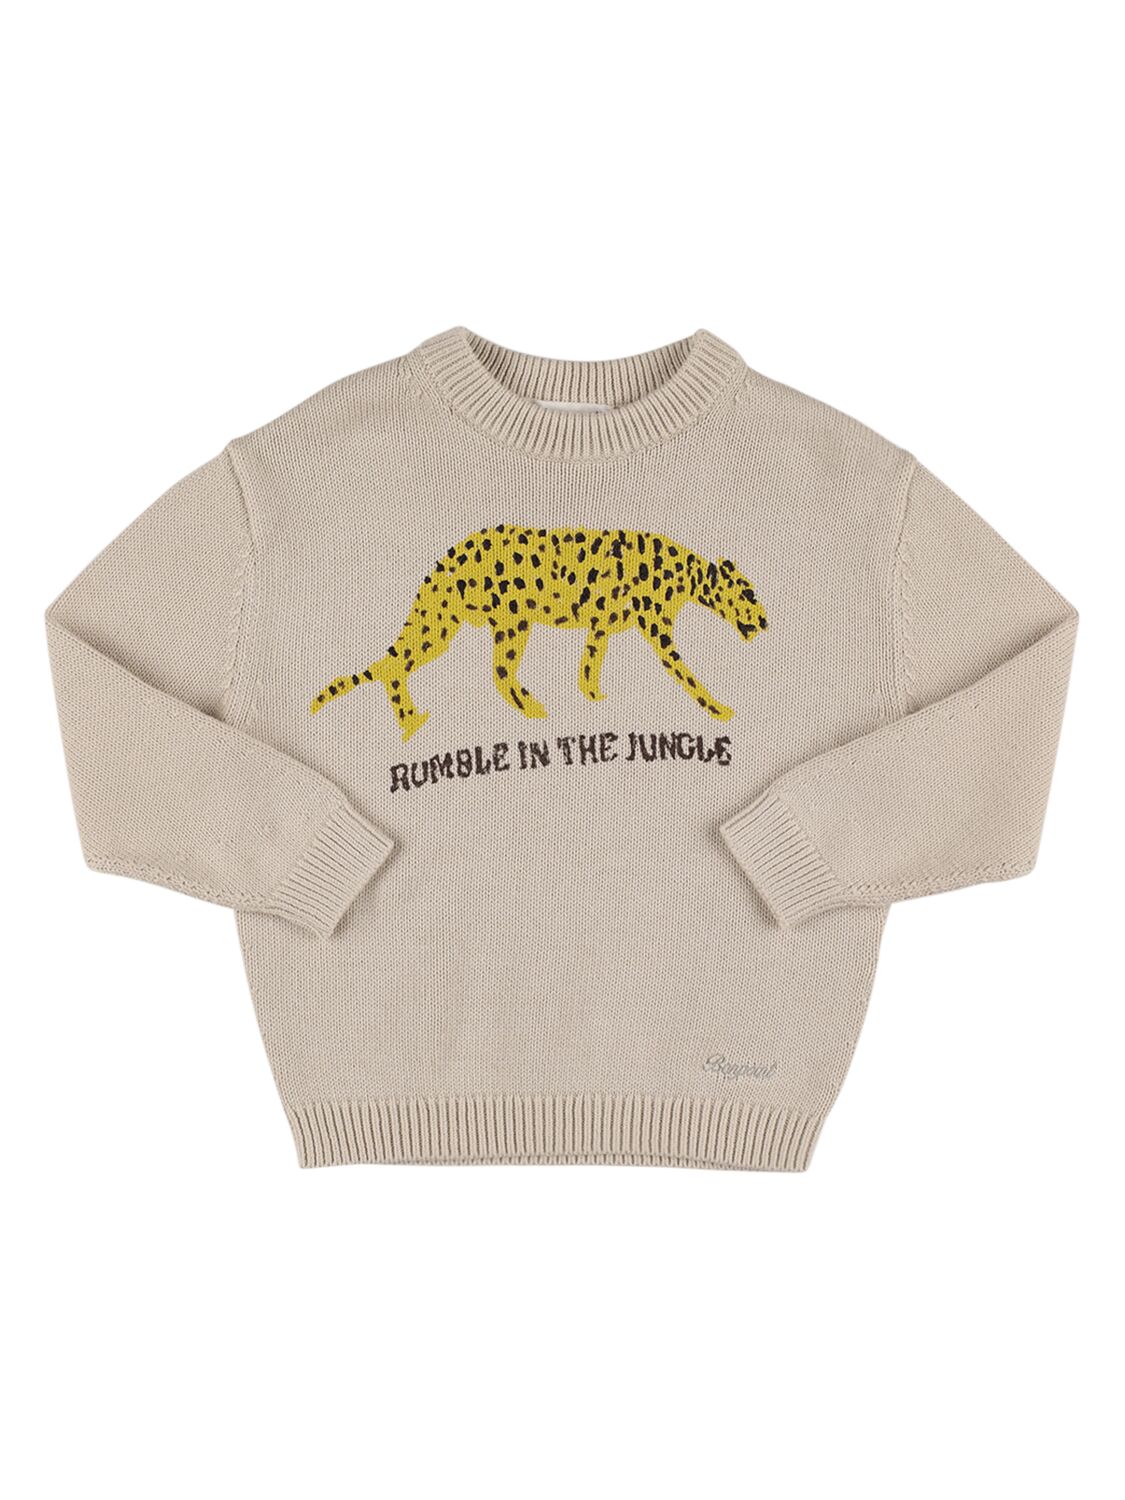 Bonpoint Kids' Printed Cotton Knit Jumper In Grey,multi